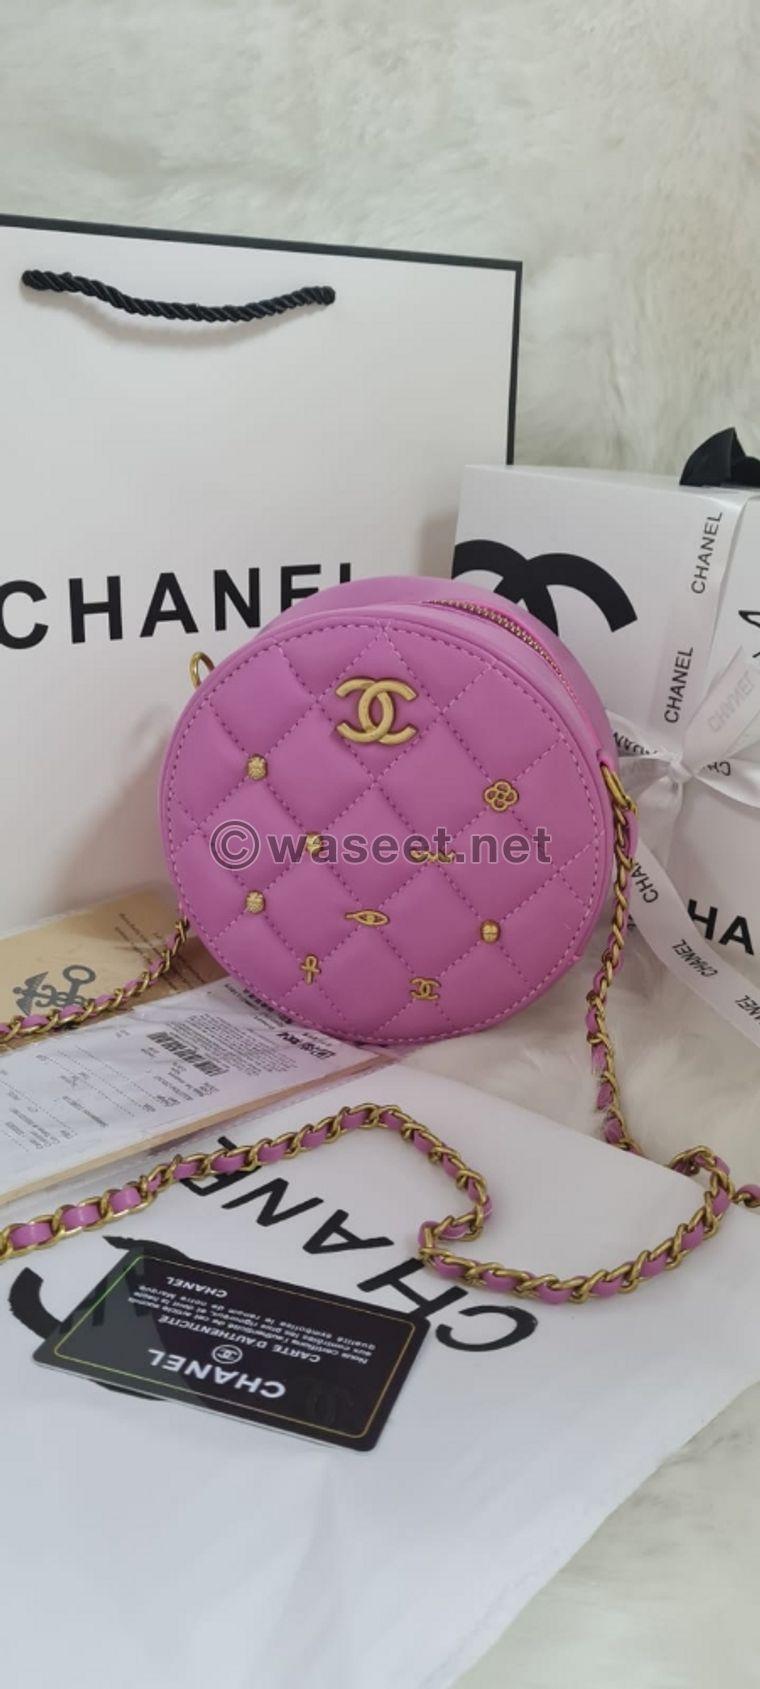 Chanel bags for sale 1